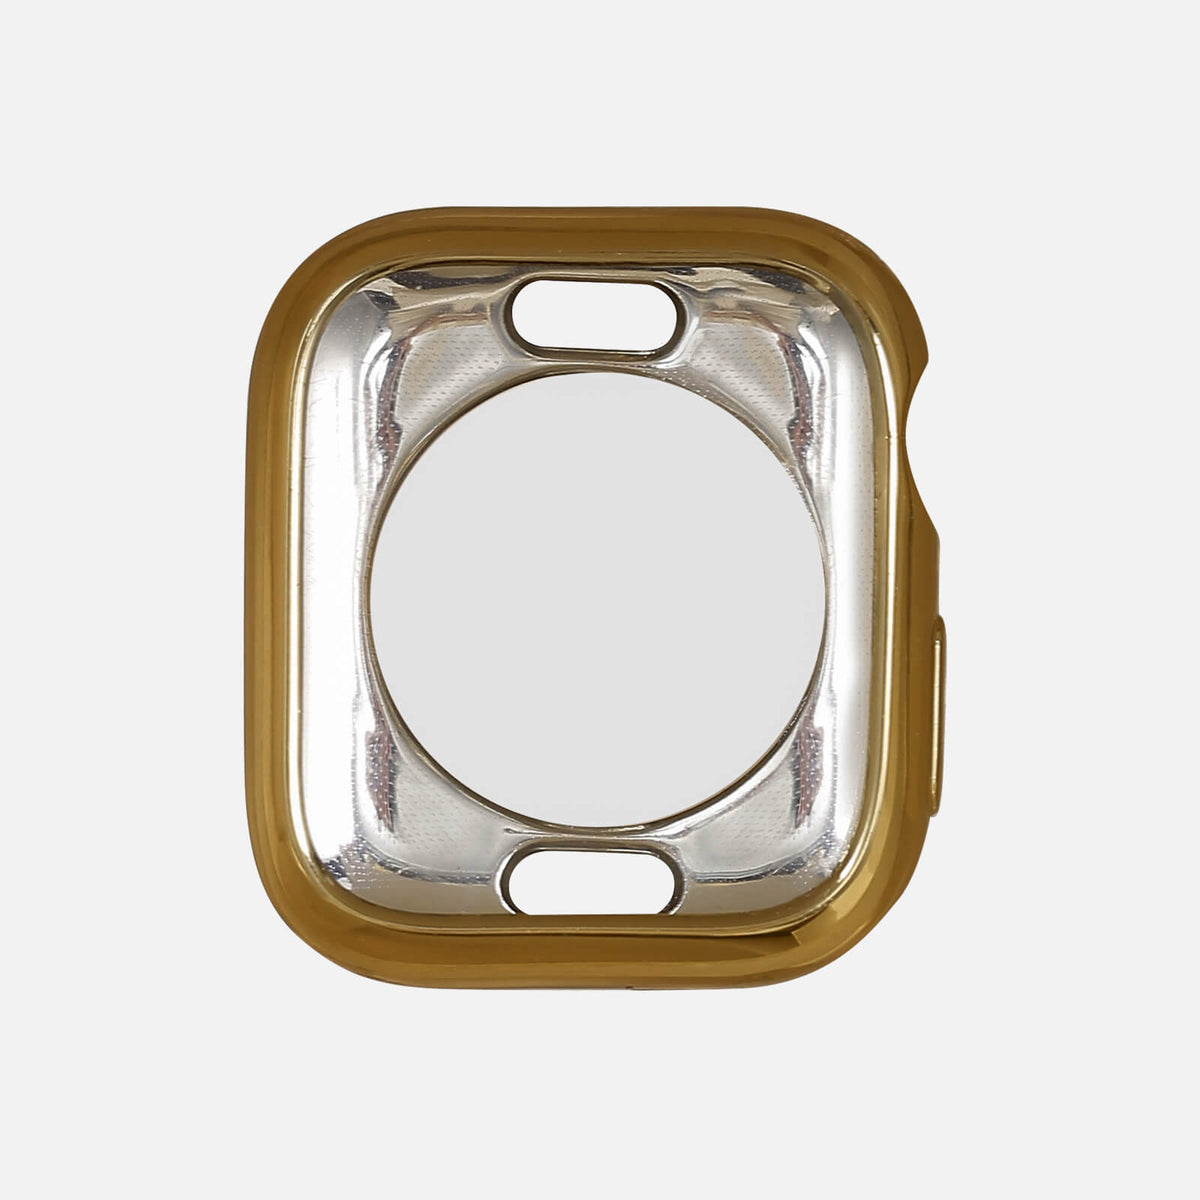 Apple Watch TPU Chrome Bumper Protection Case - Gold